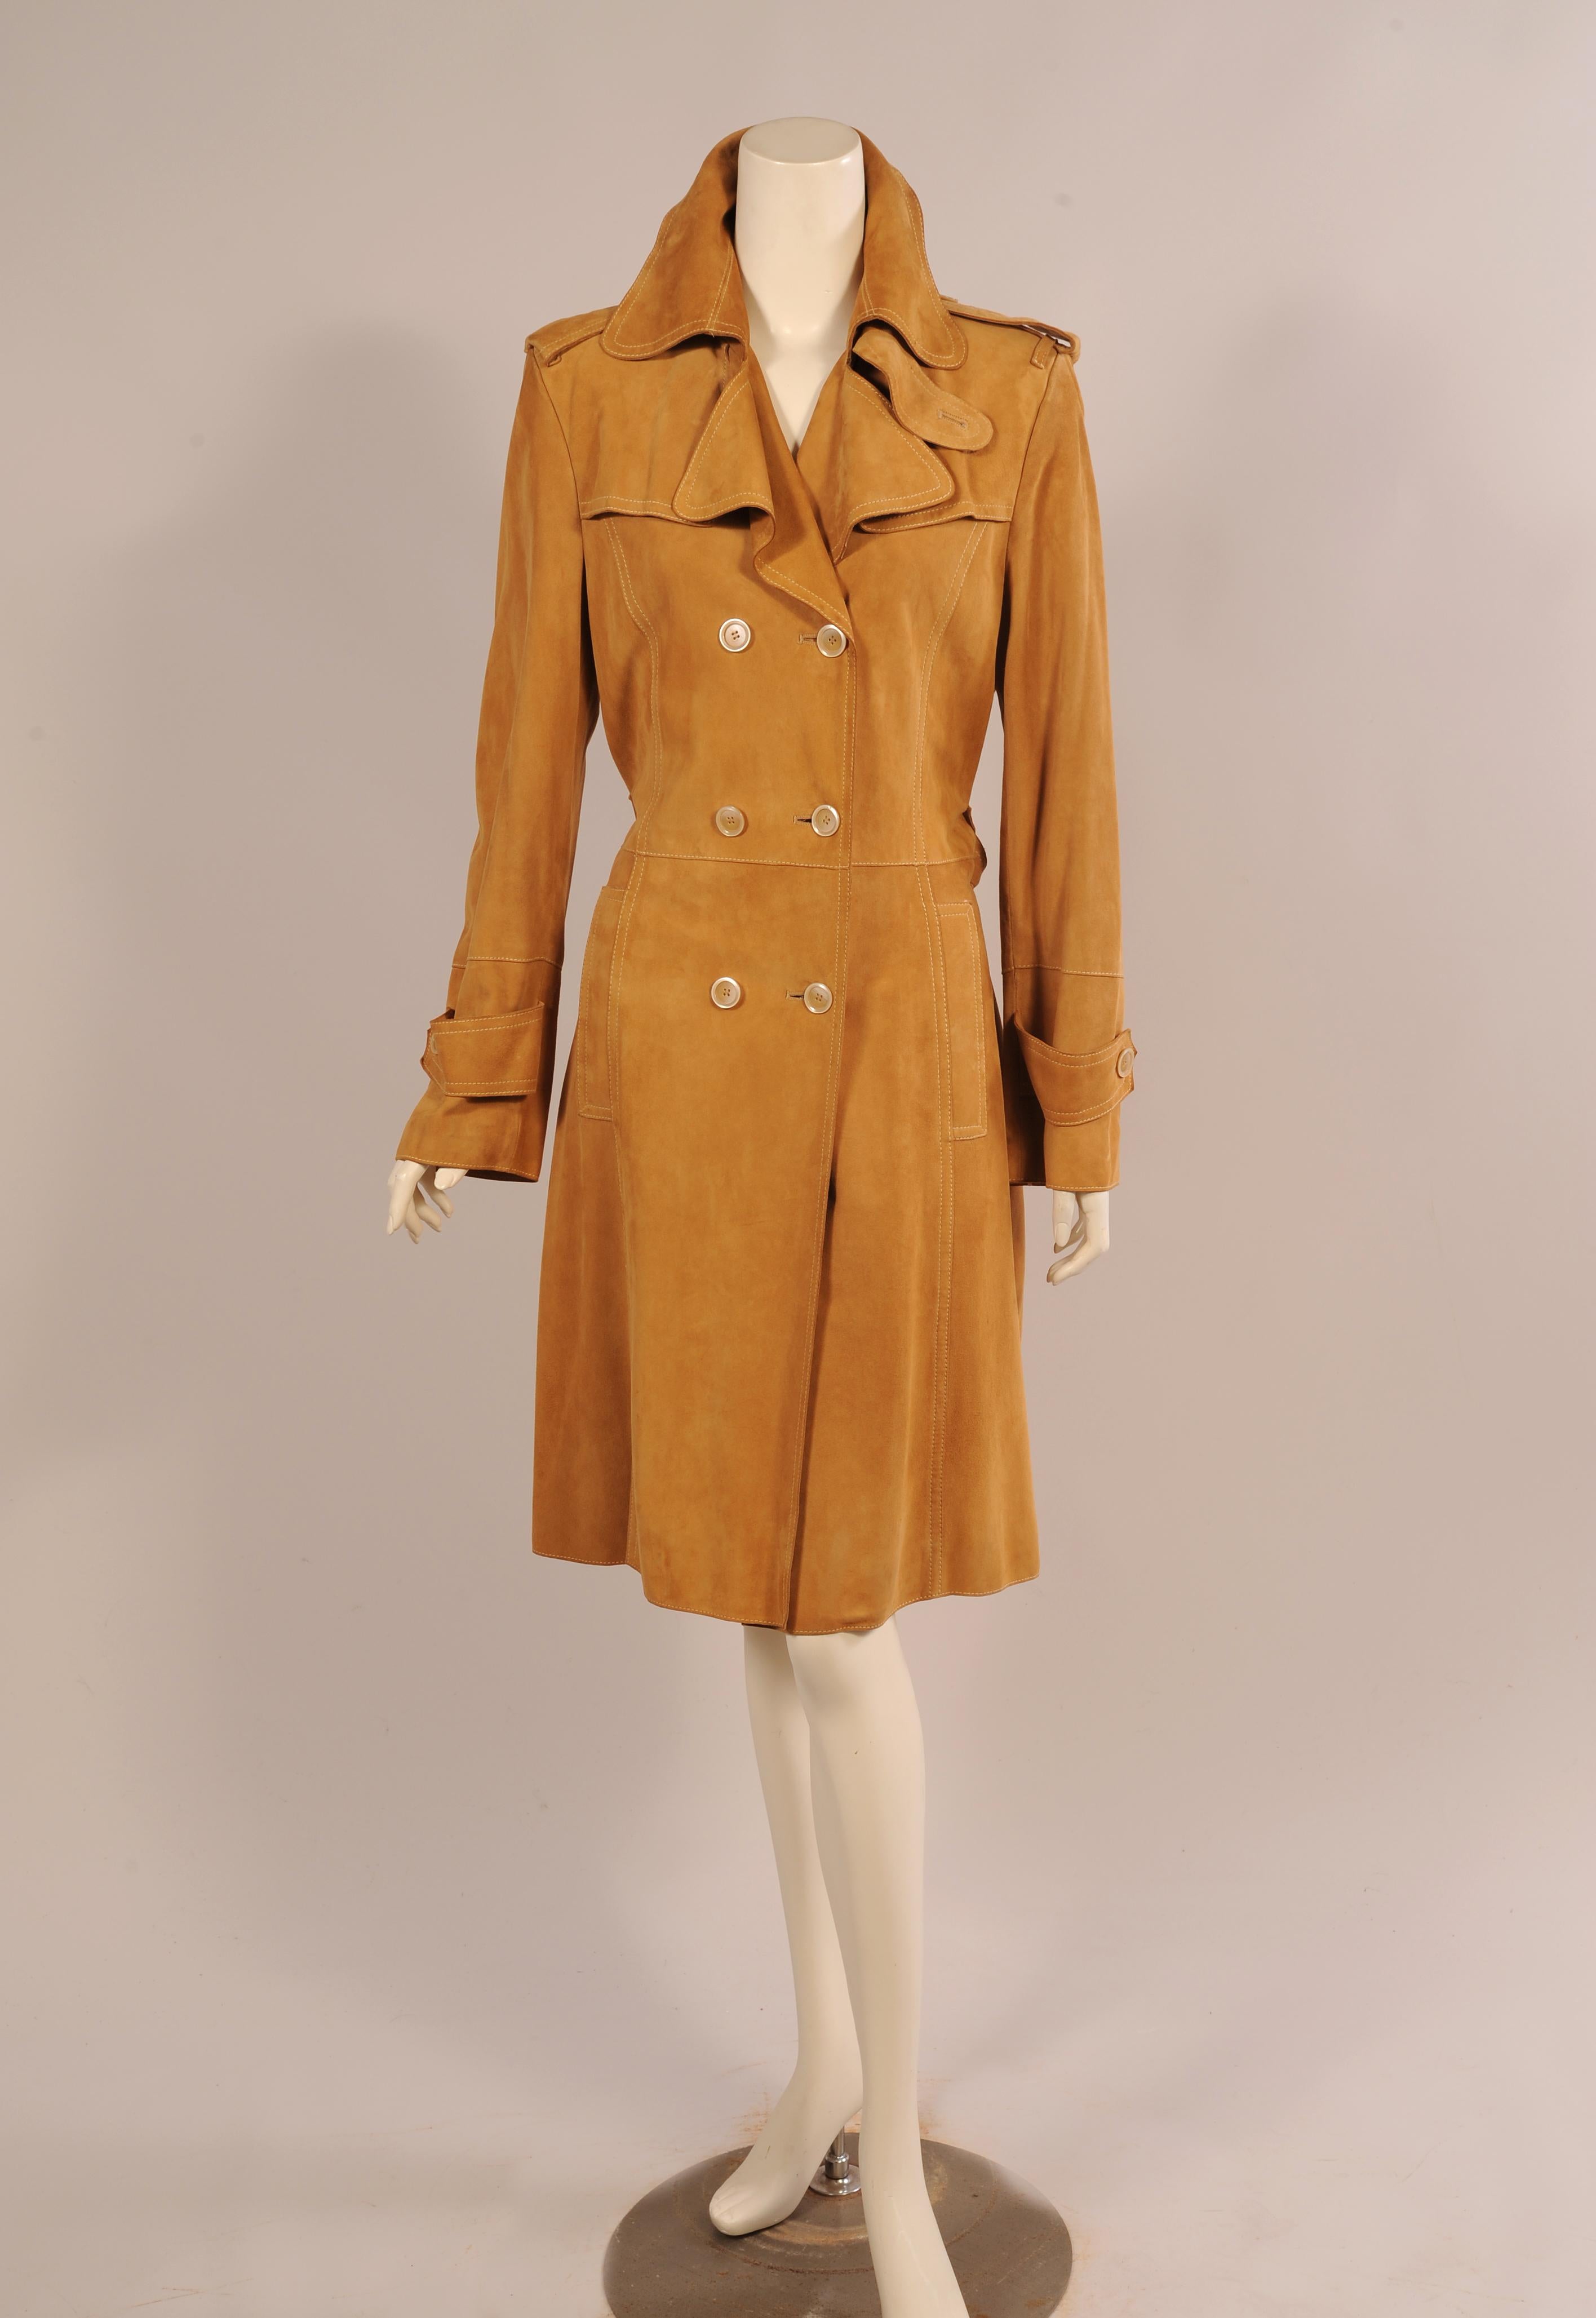 Brown Walter Germany Caramel Colored Butter Soft Suede Trench Coat 